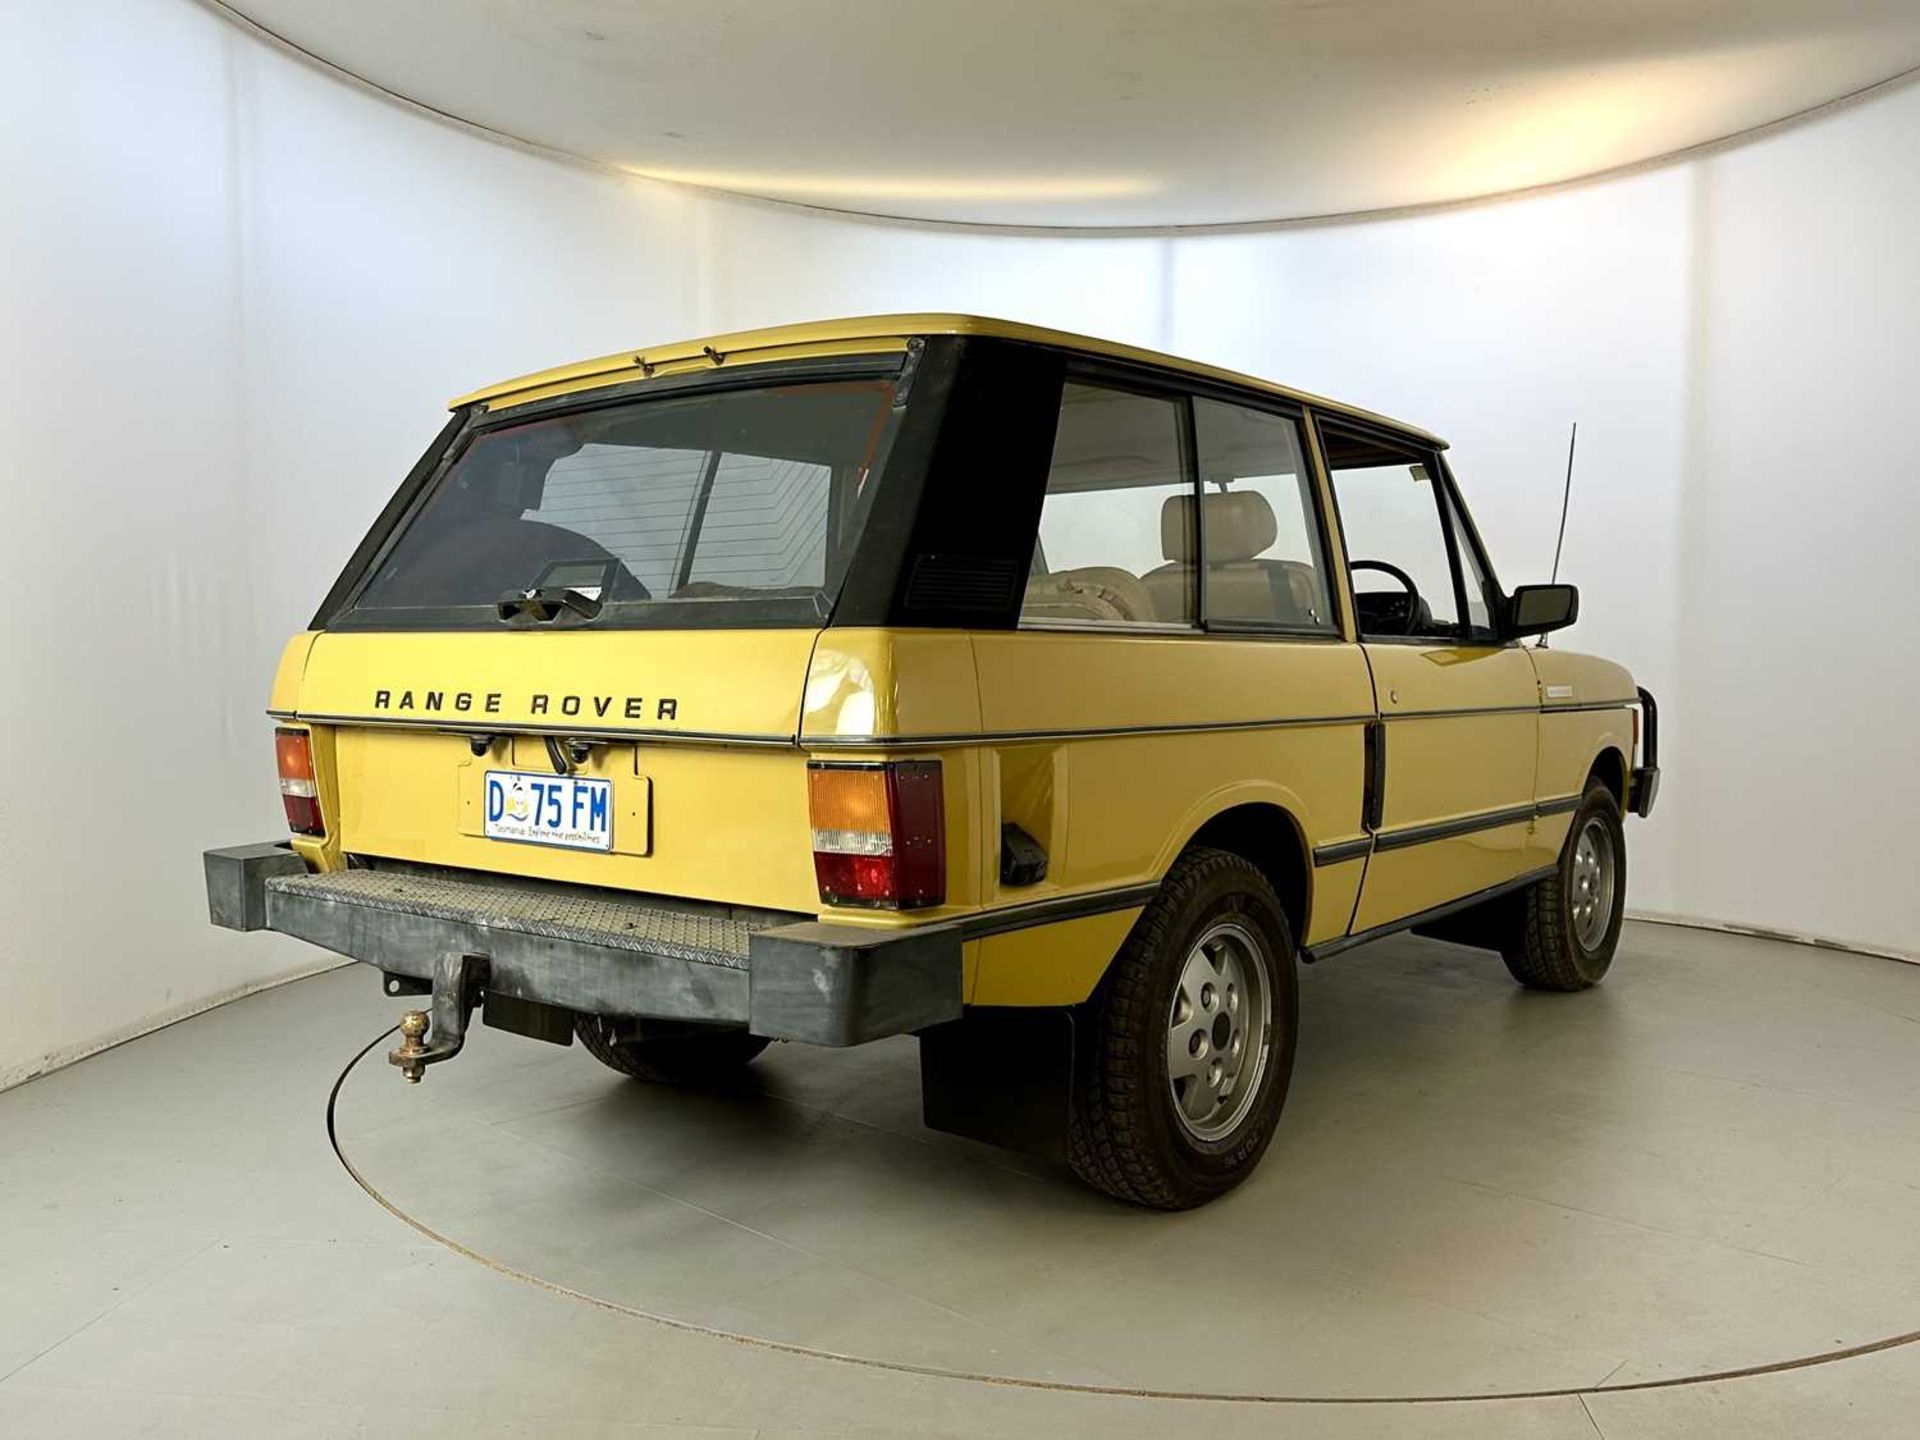 1974 Land Rover Range Rover Showing 26,000 miles from new - Image 9 of 29